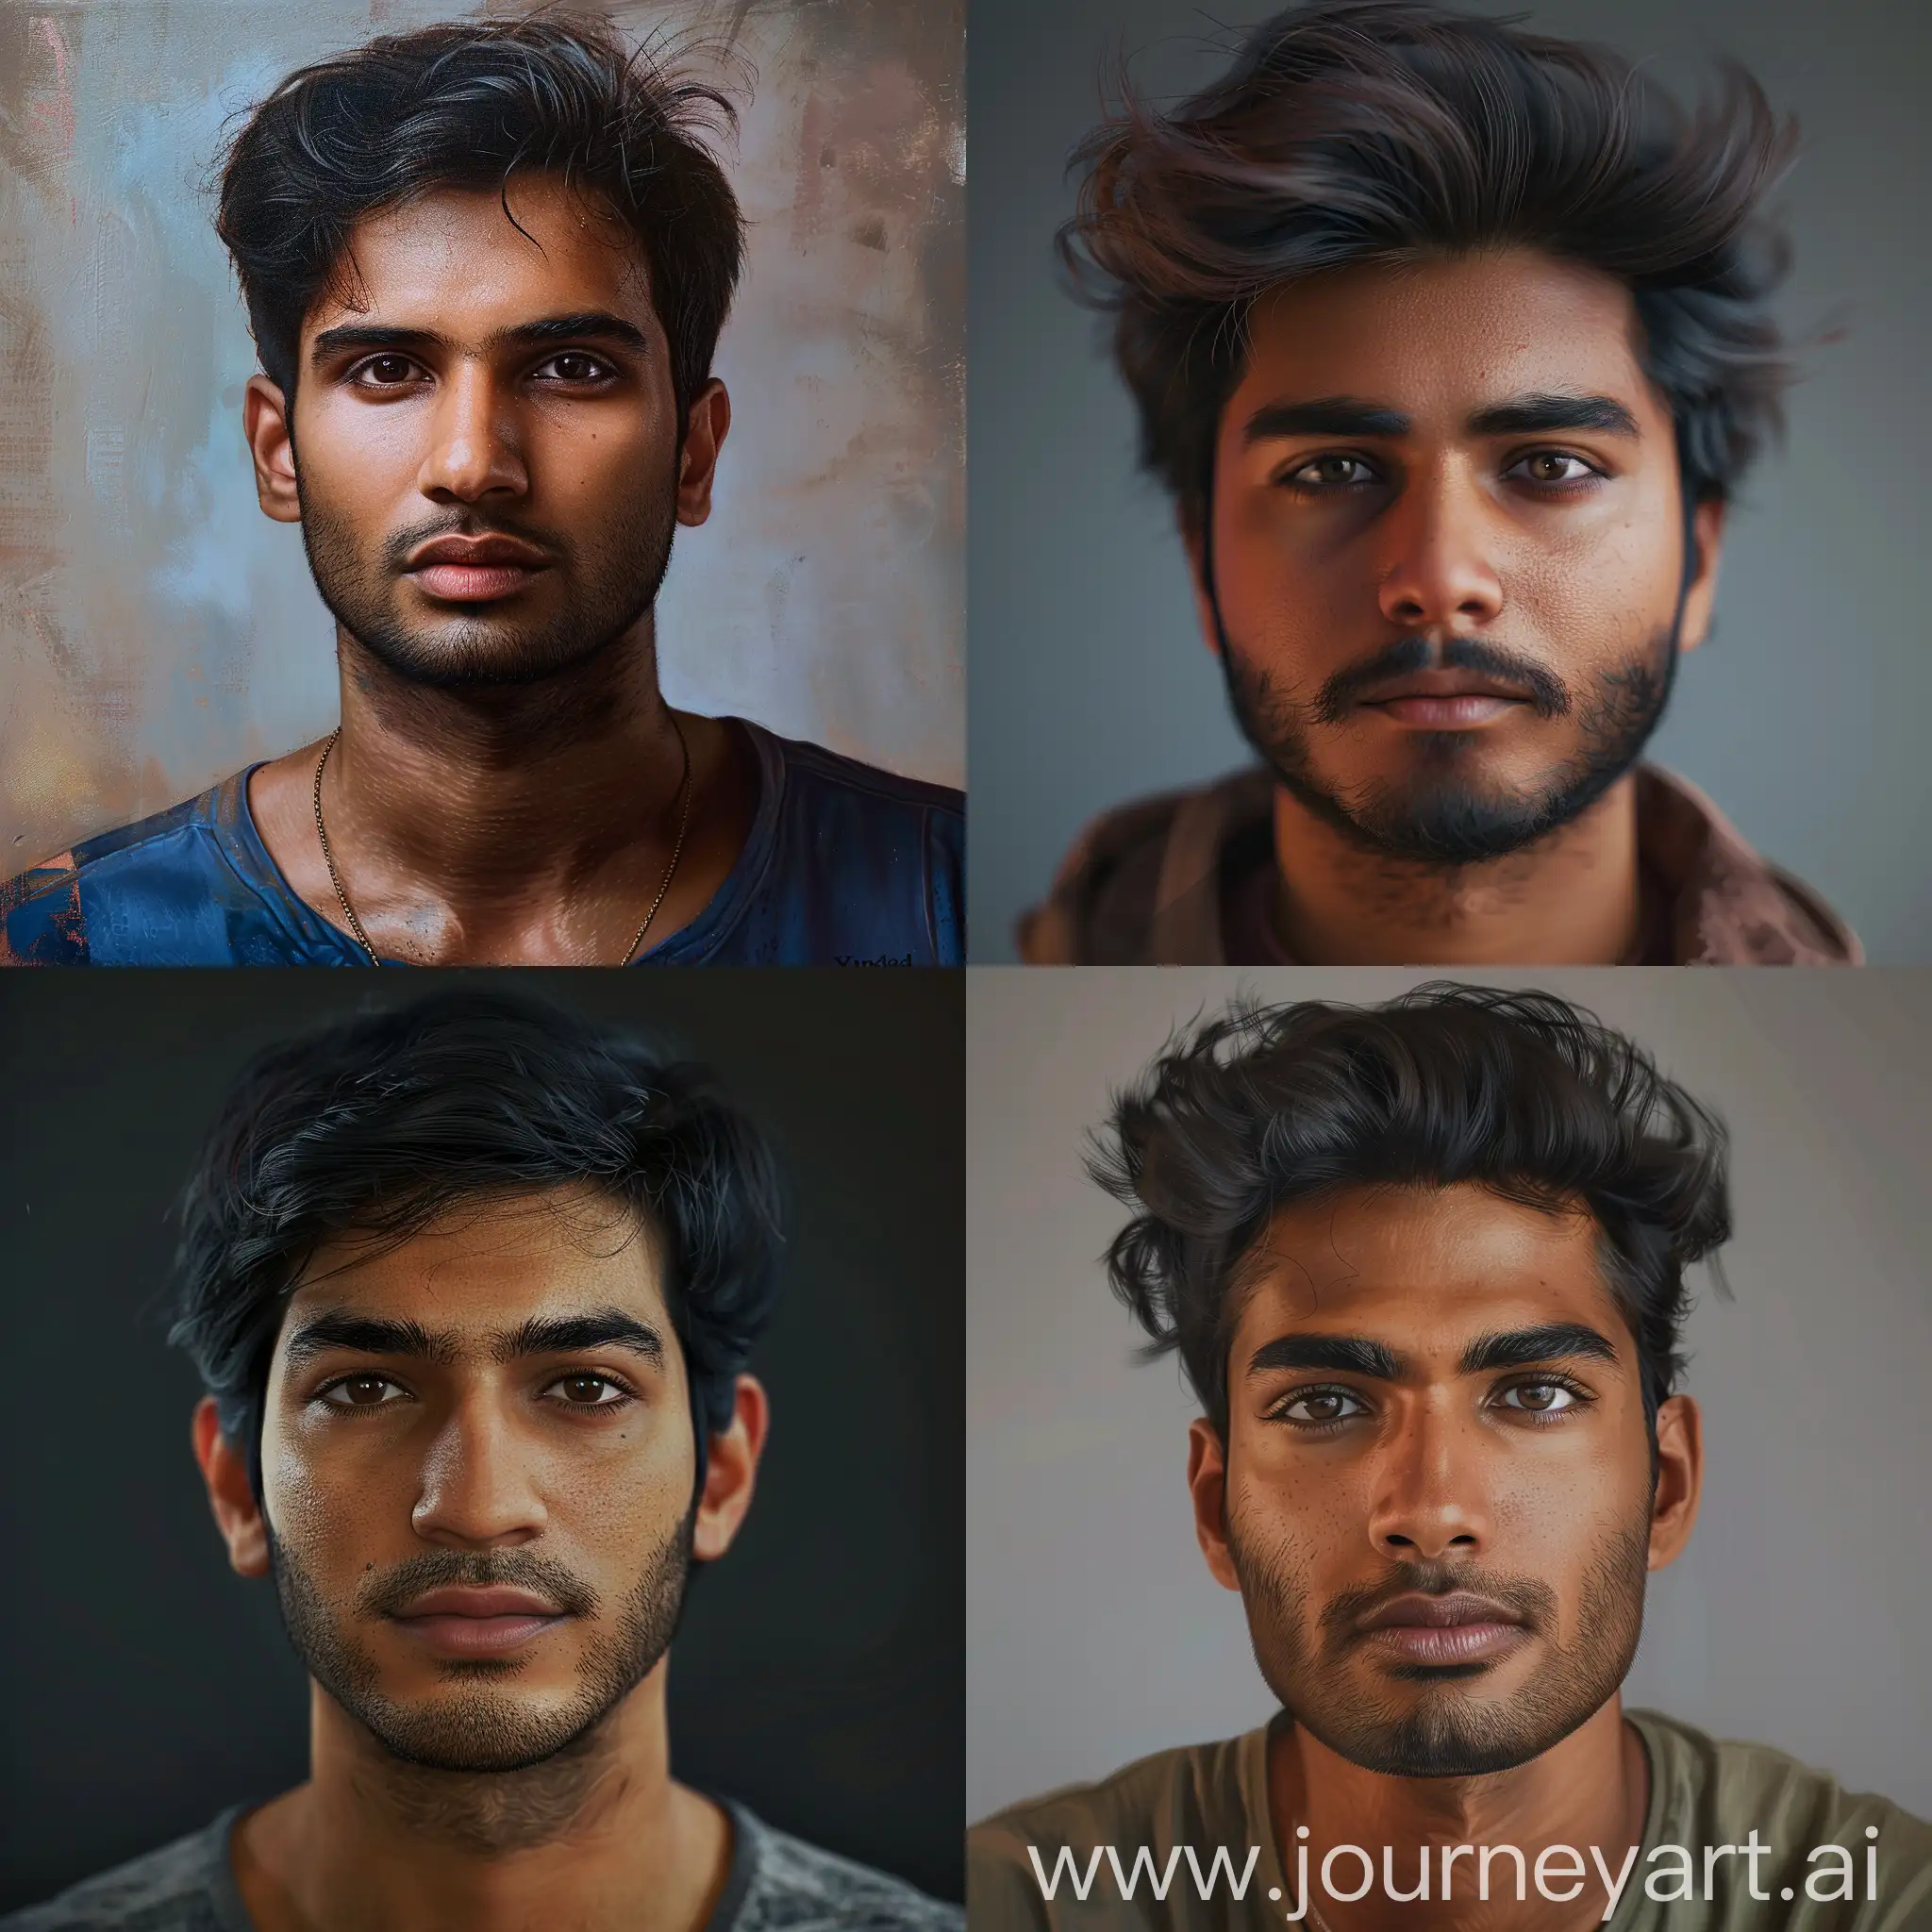 generate a human by their name - Vinay, hyper realistic